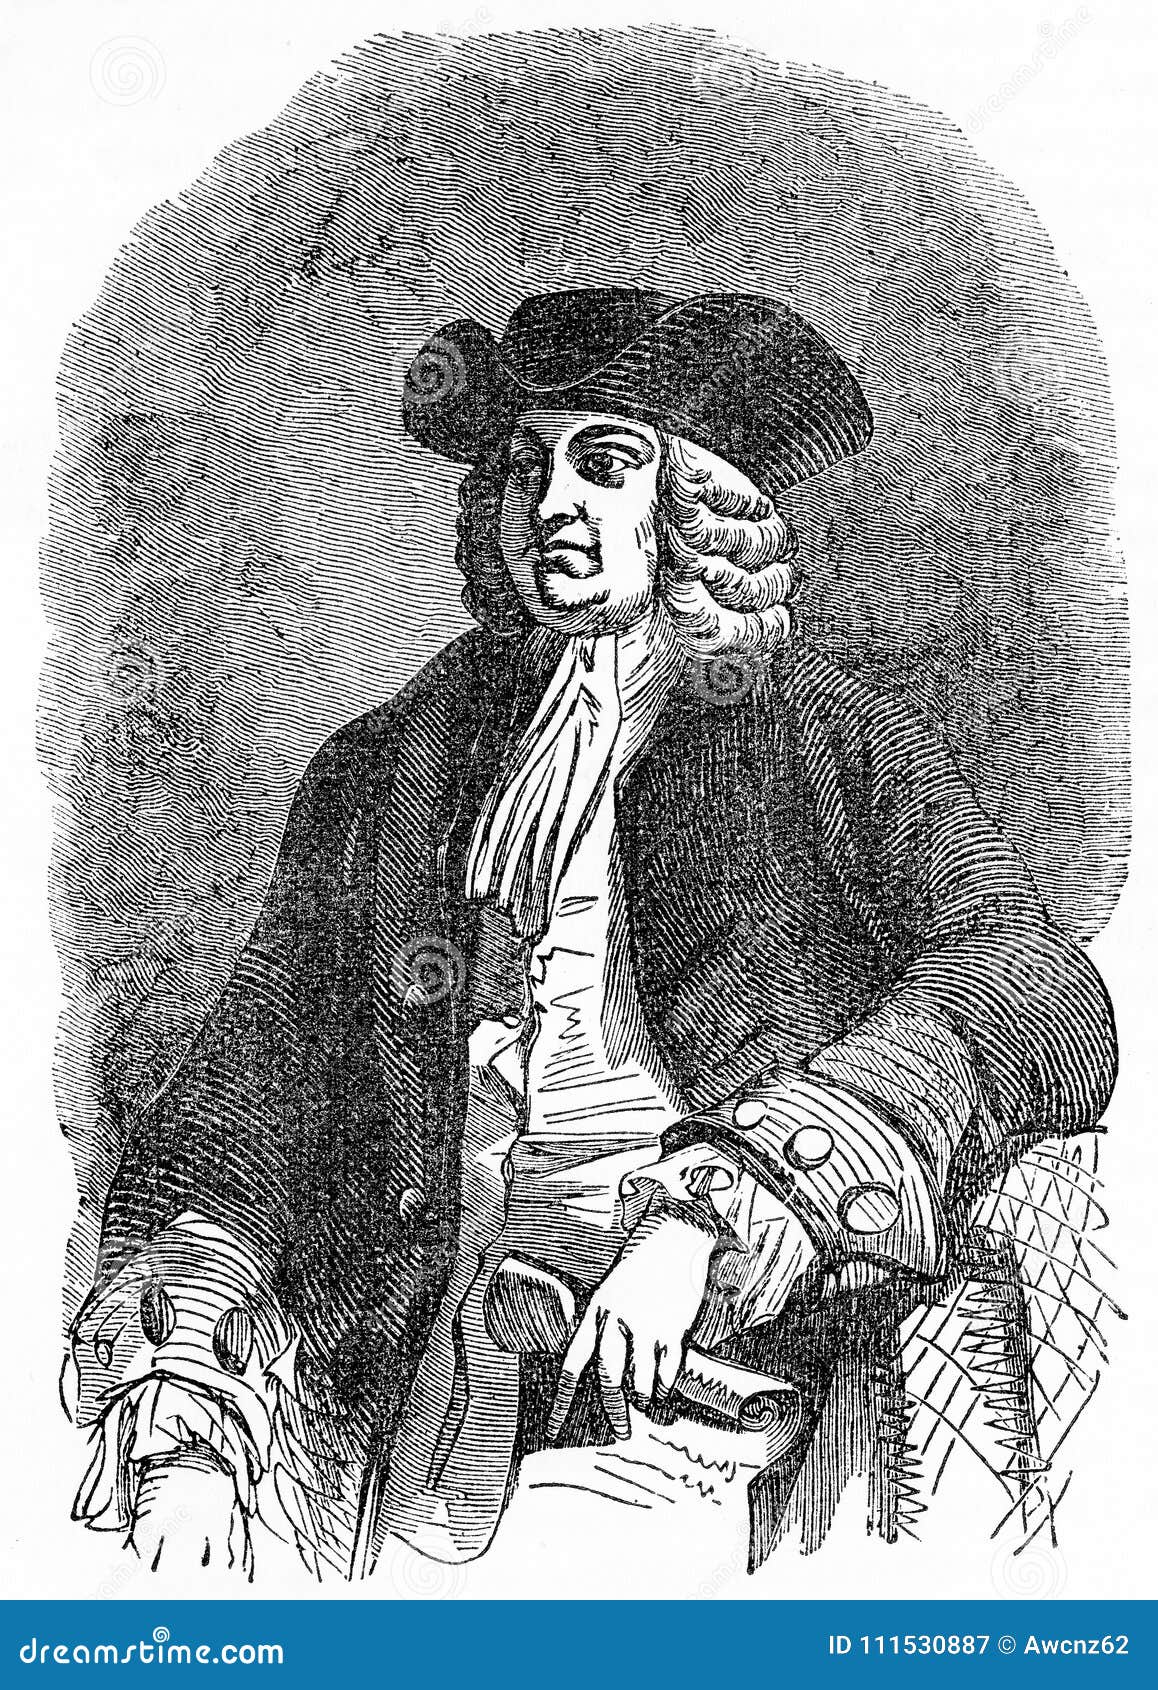 william penn, founder of the state of pennsylvania